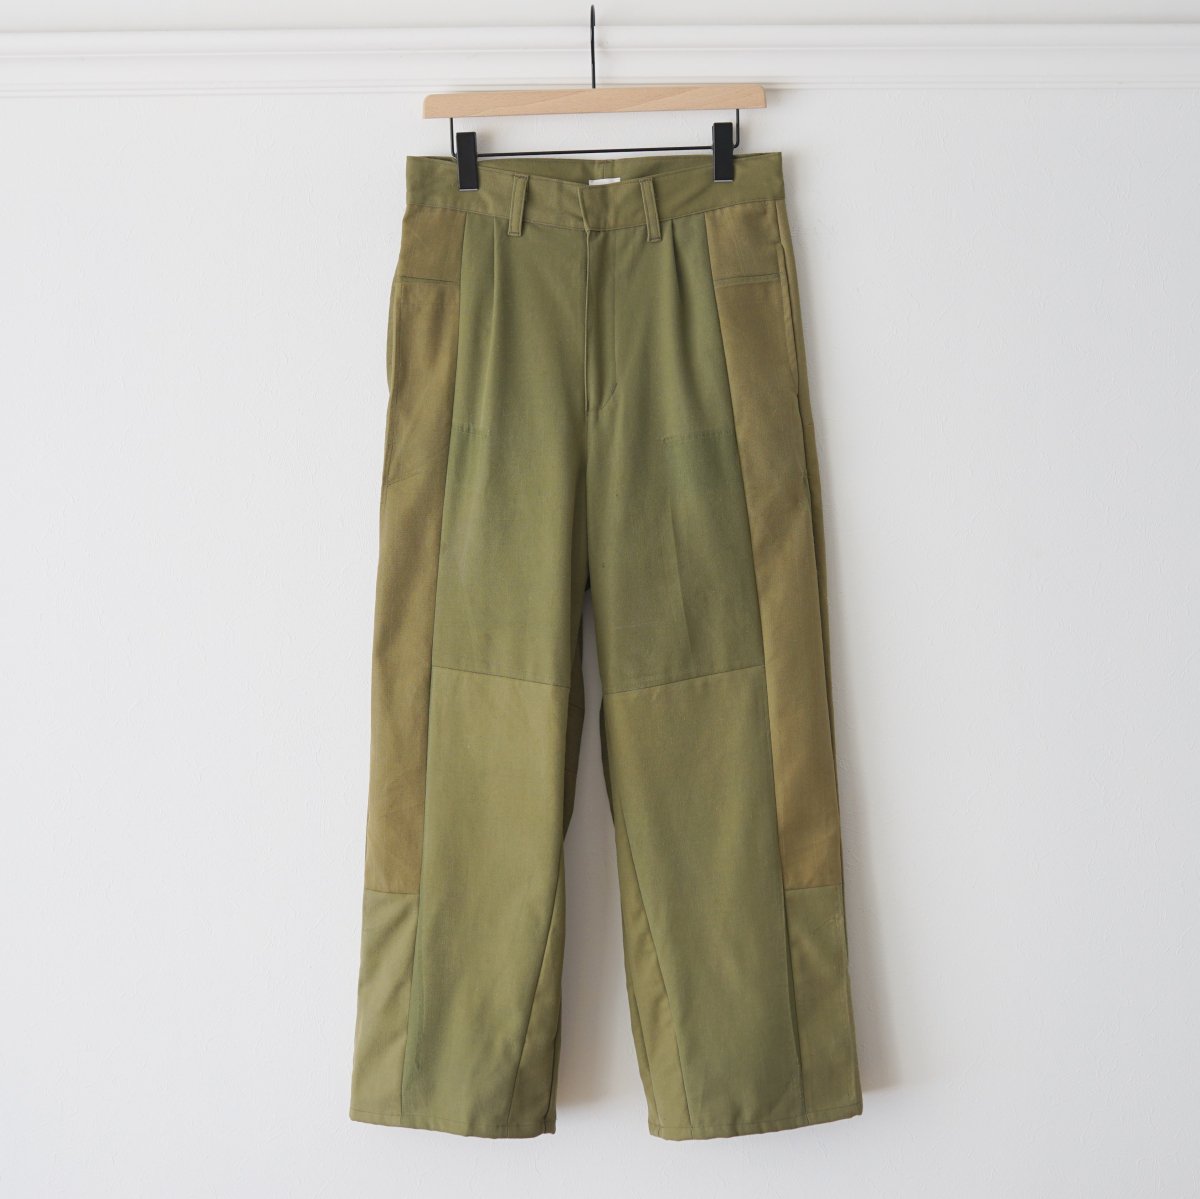 【SEEALL シーオール】 RECONSTRUCTED LARGE PANTS - MILITARY